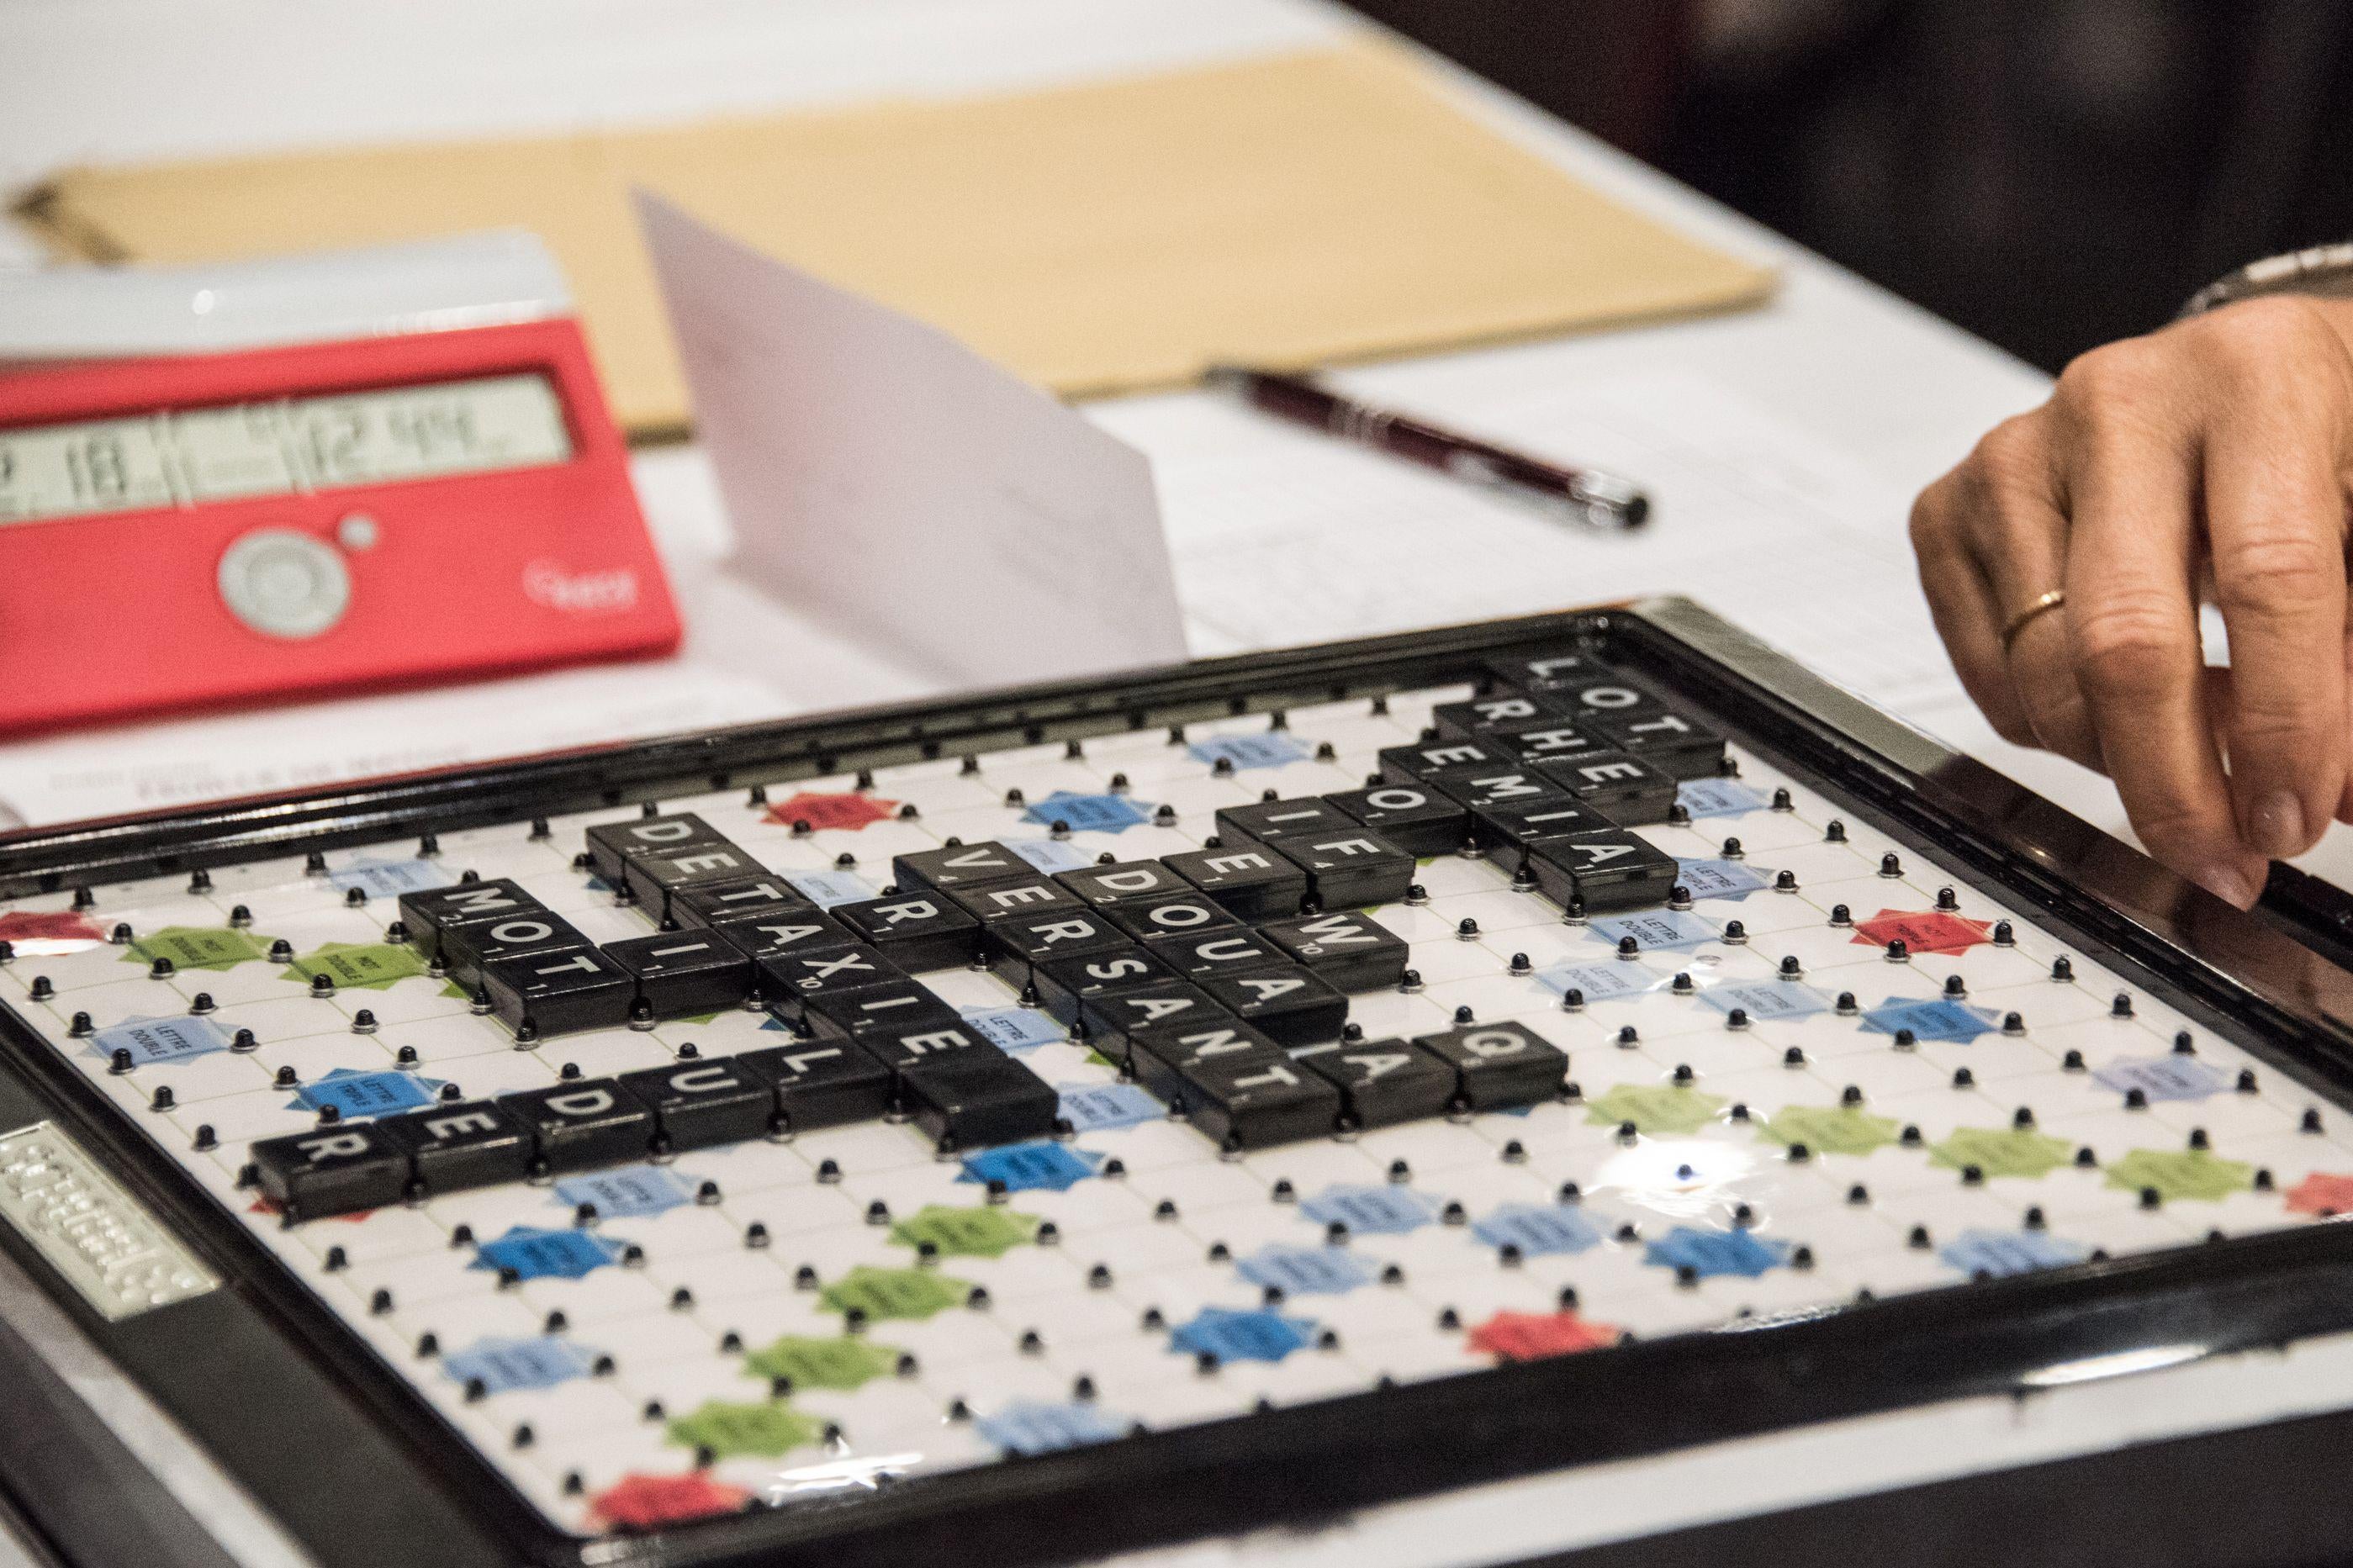 Scrabble players choose a word during the World Scrabble Championships on August 29, 2016 at the Grand Palais in Lille.